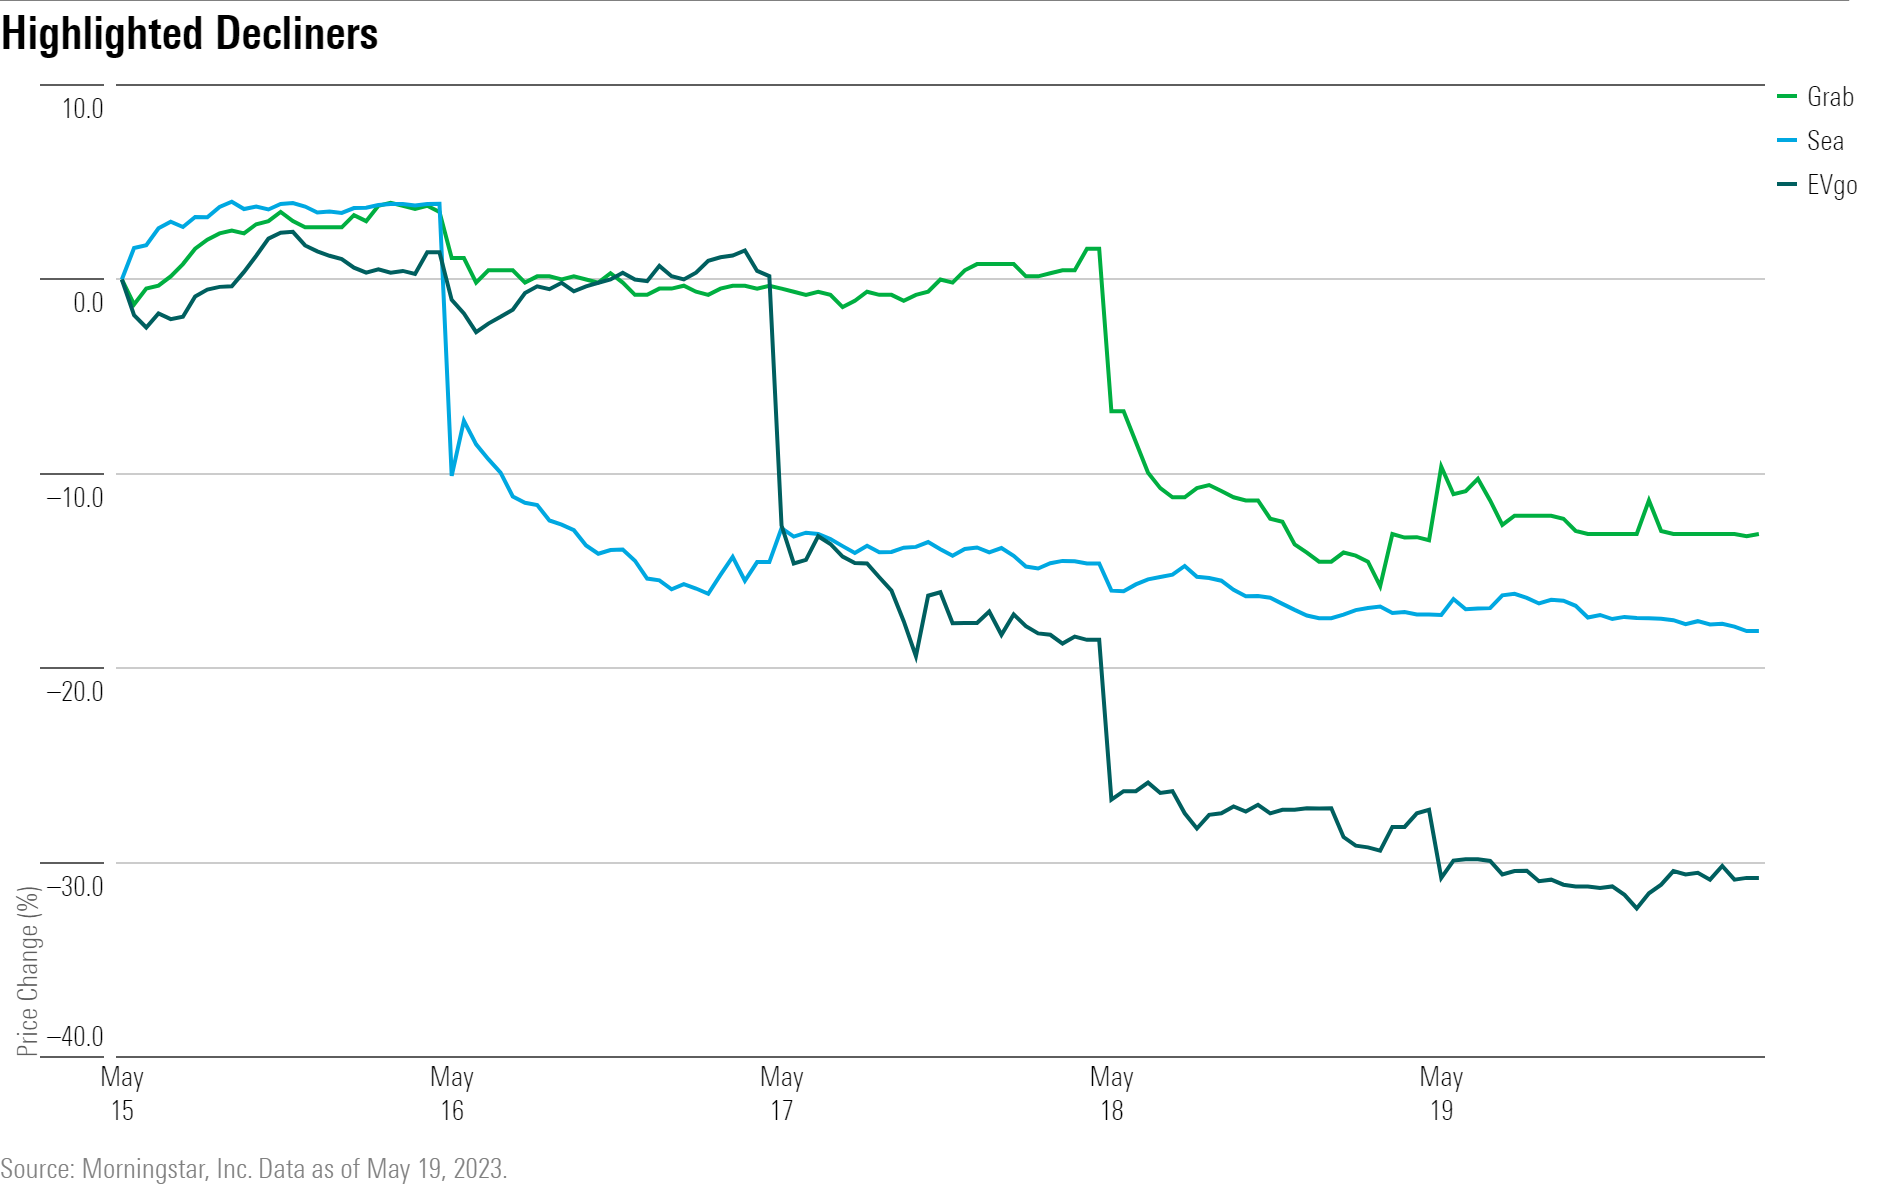 A line chart showing the performance $EVGO, $SE, and $GRAB stock.